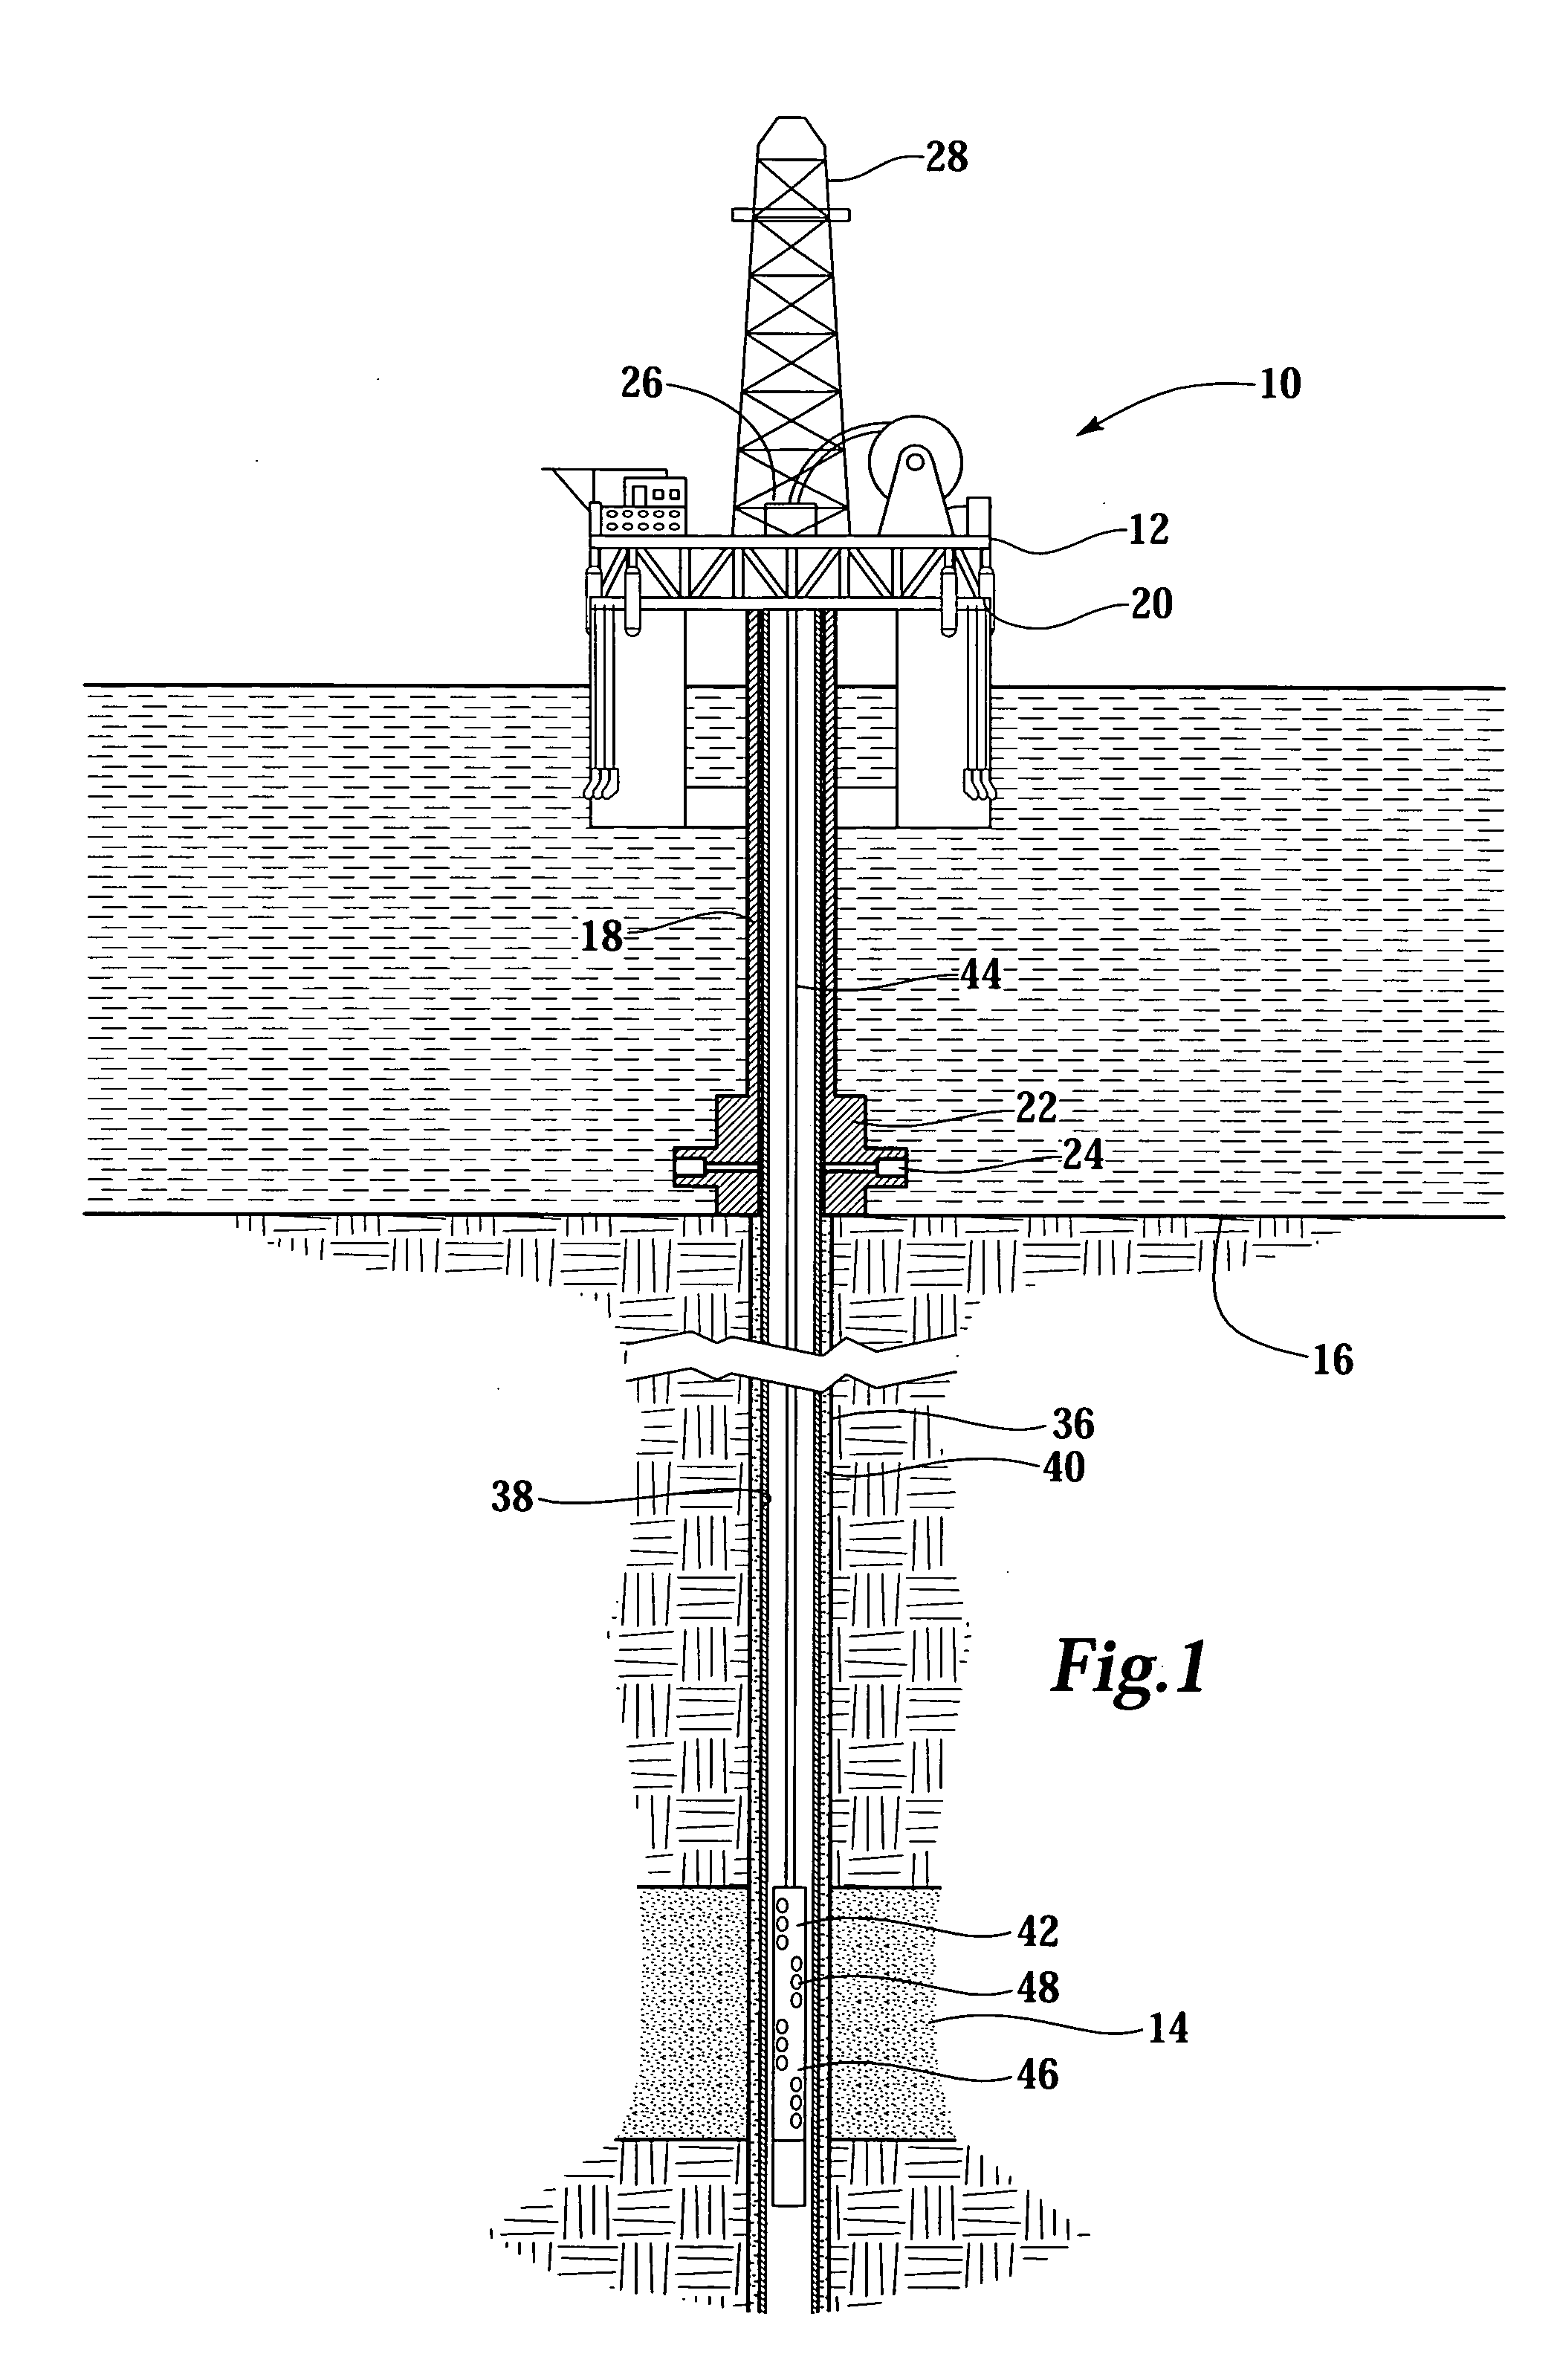 Perforating gun assembly and method for creating perforation cavities